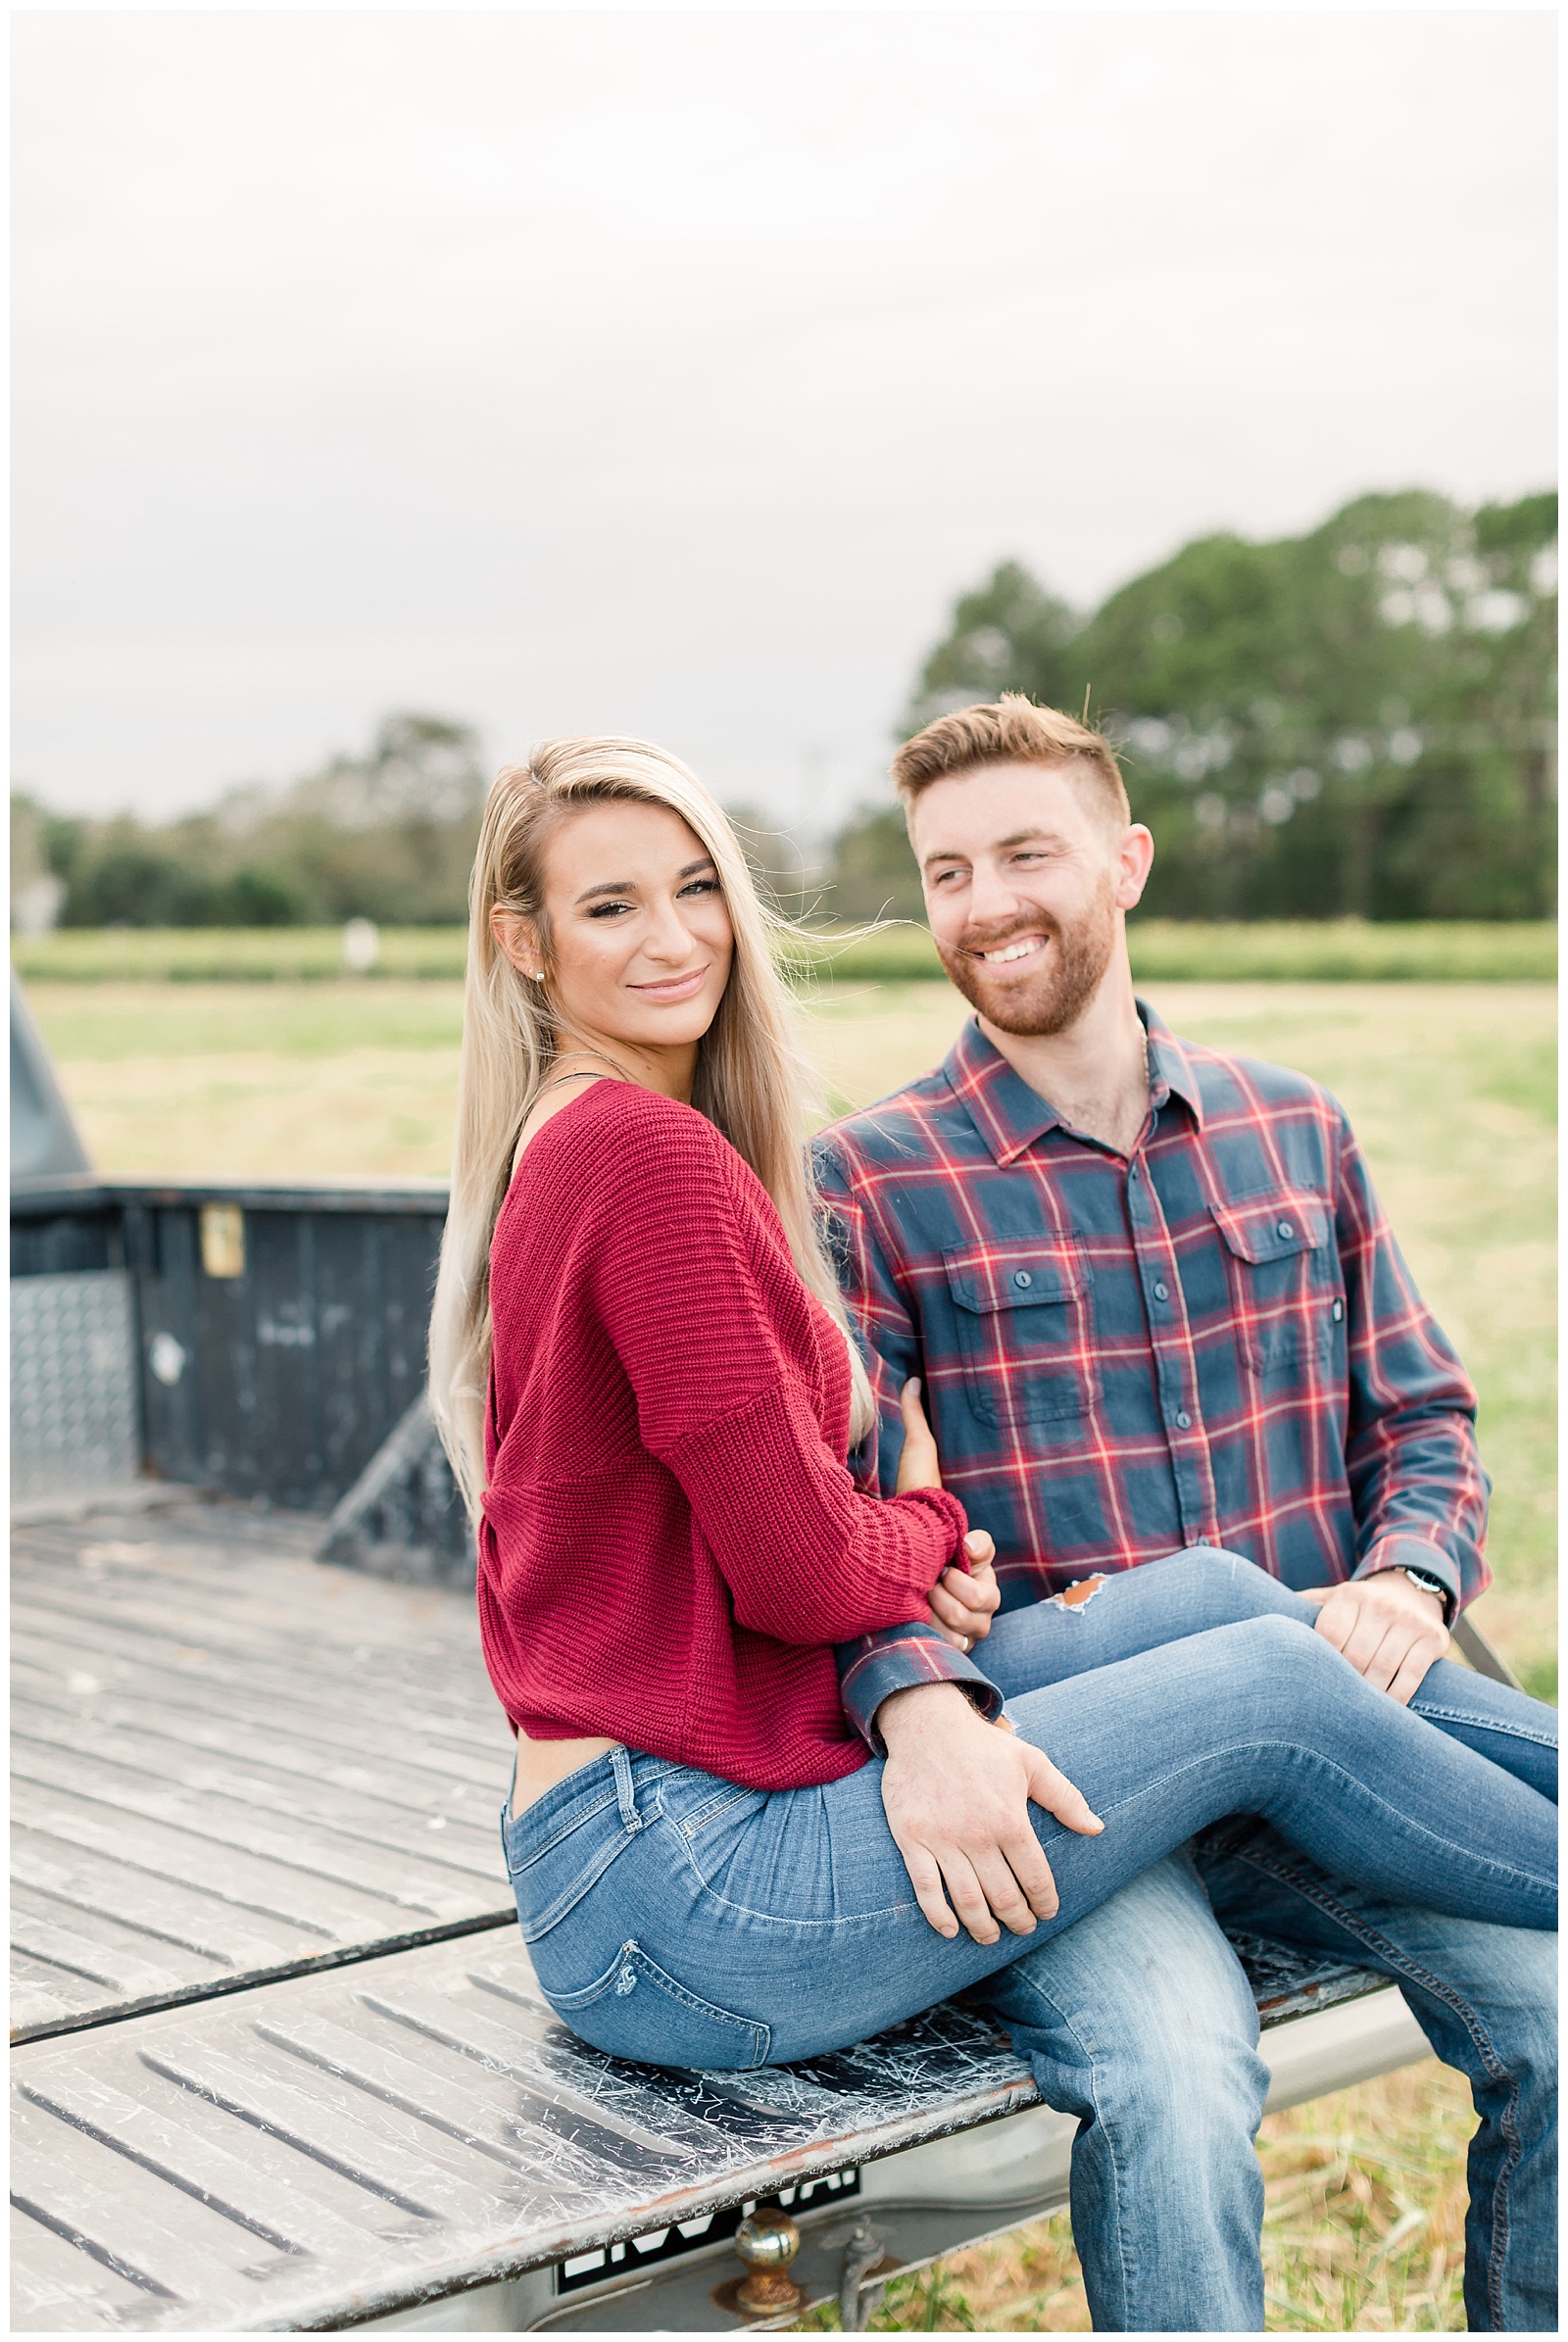 cullipher-farms-engagement-session-44.jpg